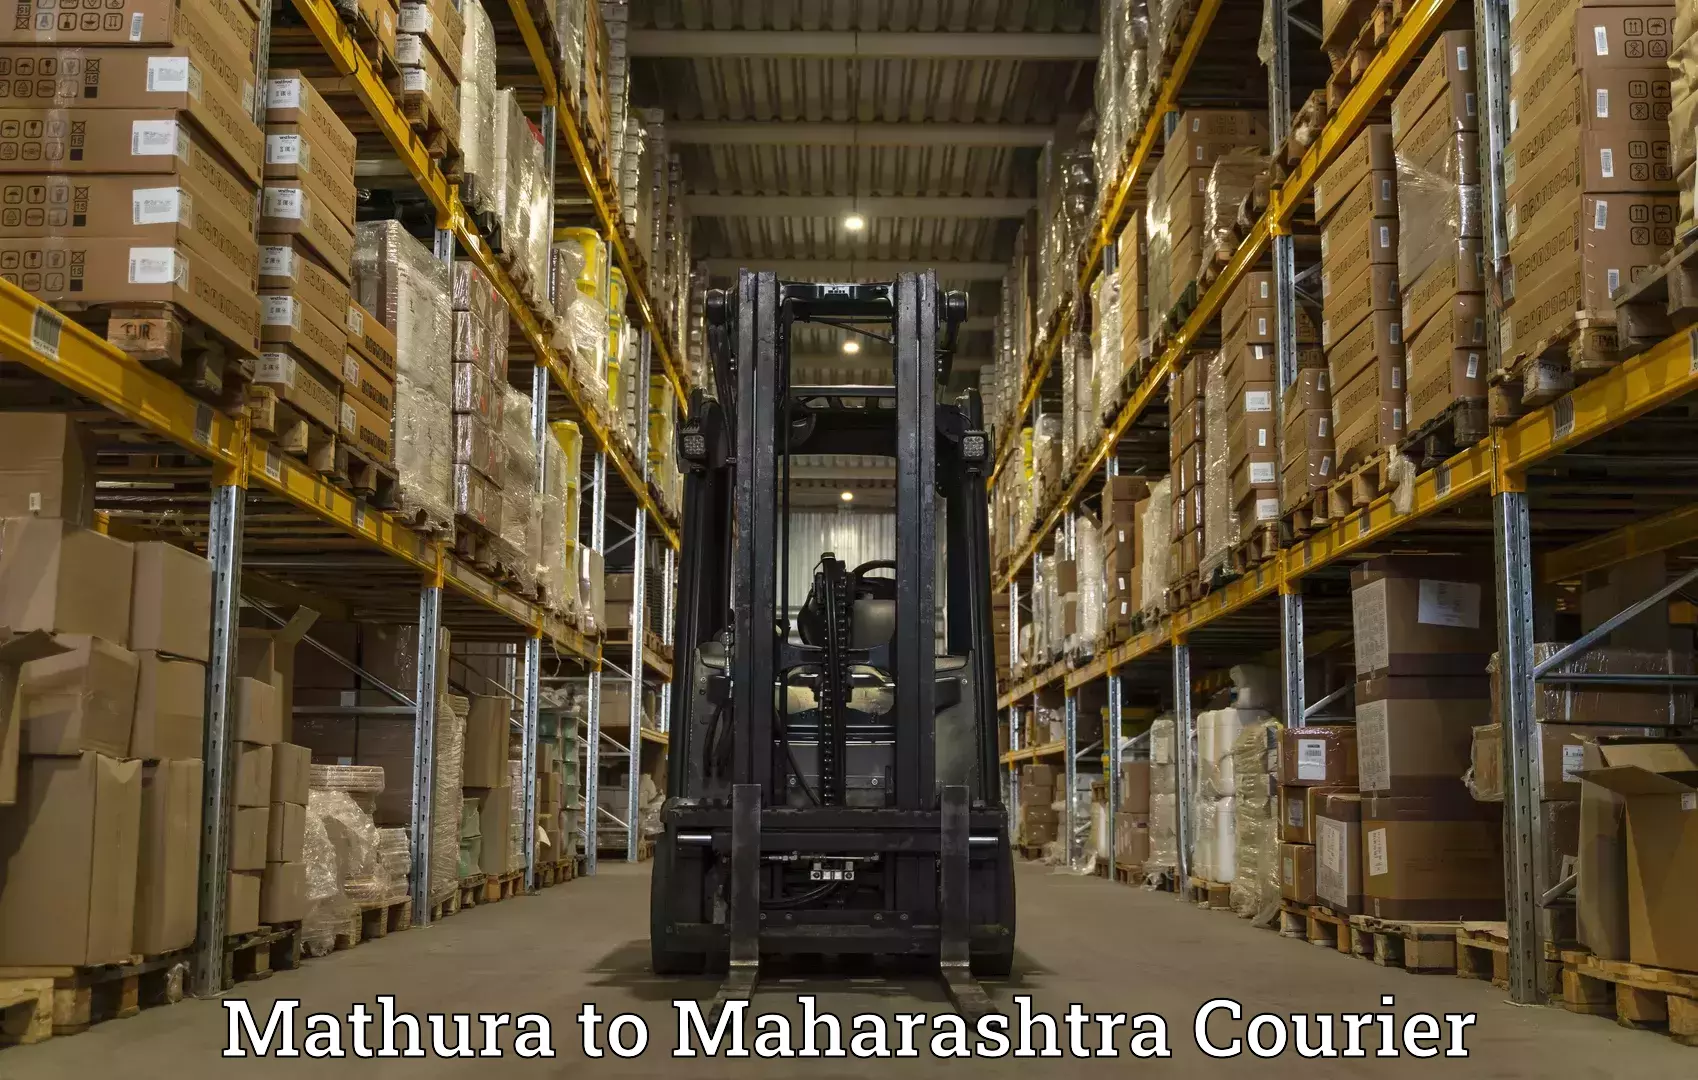 Parcel service for businesses in Mathura to Bhokar